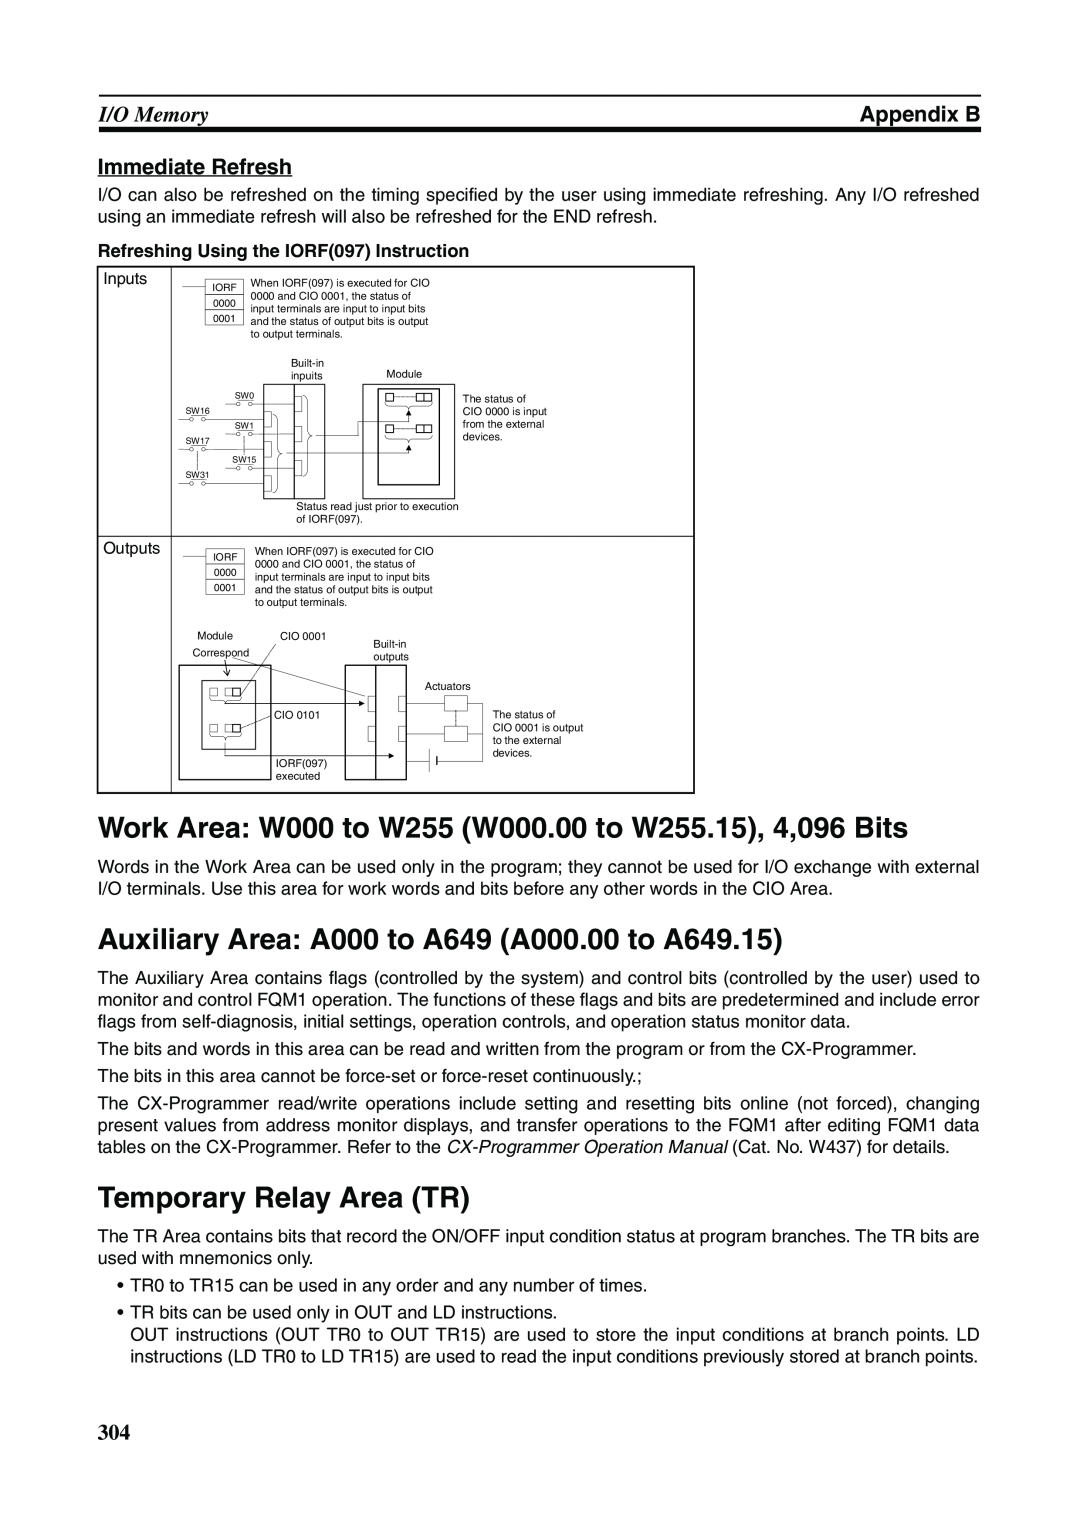 Omron FQM1-CM001 Auxiliary Area: A000 to A649 A000.00 to A649.15, Temporary Relay Area TR, I/O Memory, Appendix B 